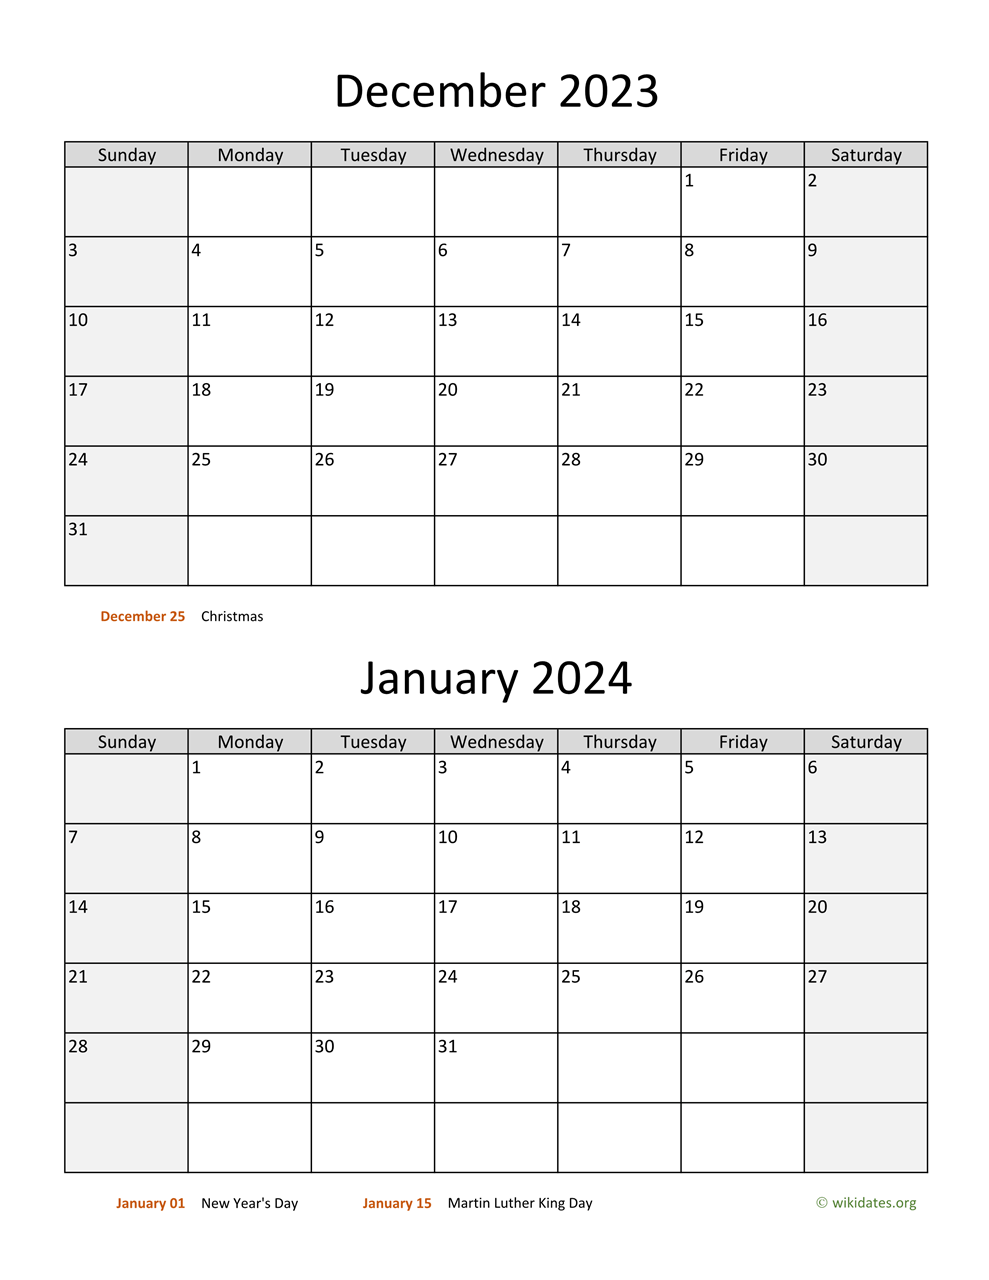 December 2023 And January 2024 Calendar | Wikidates for Printable Calendar December 2023 To January 2024